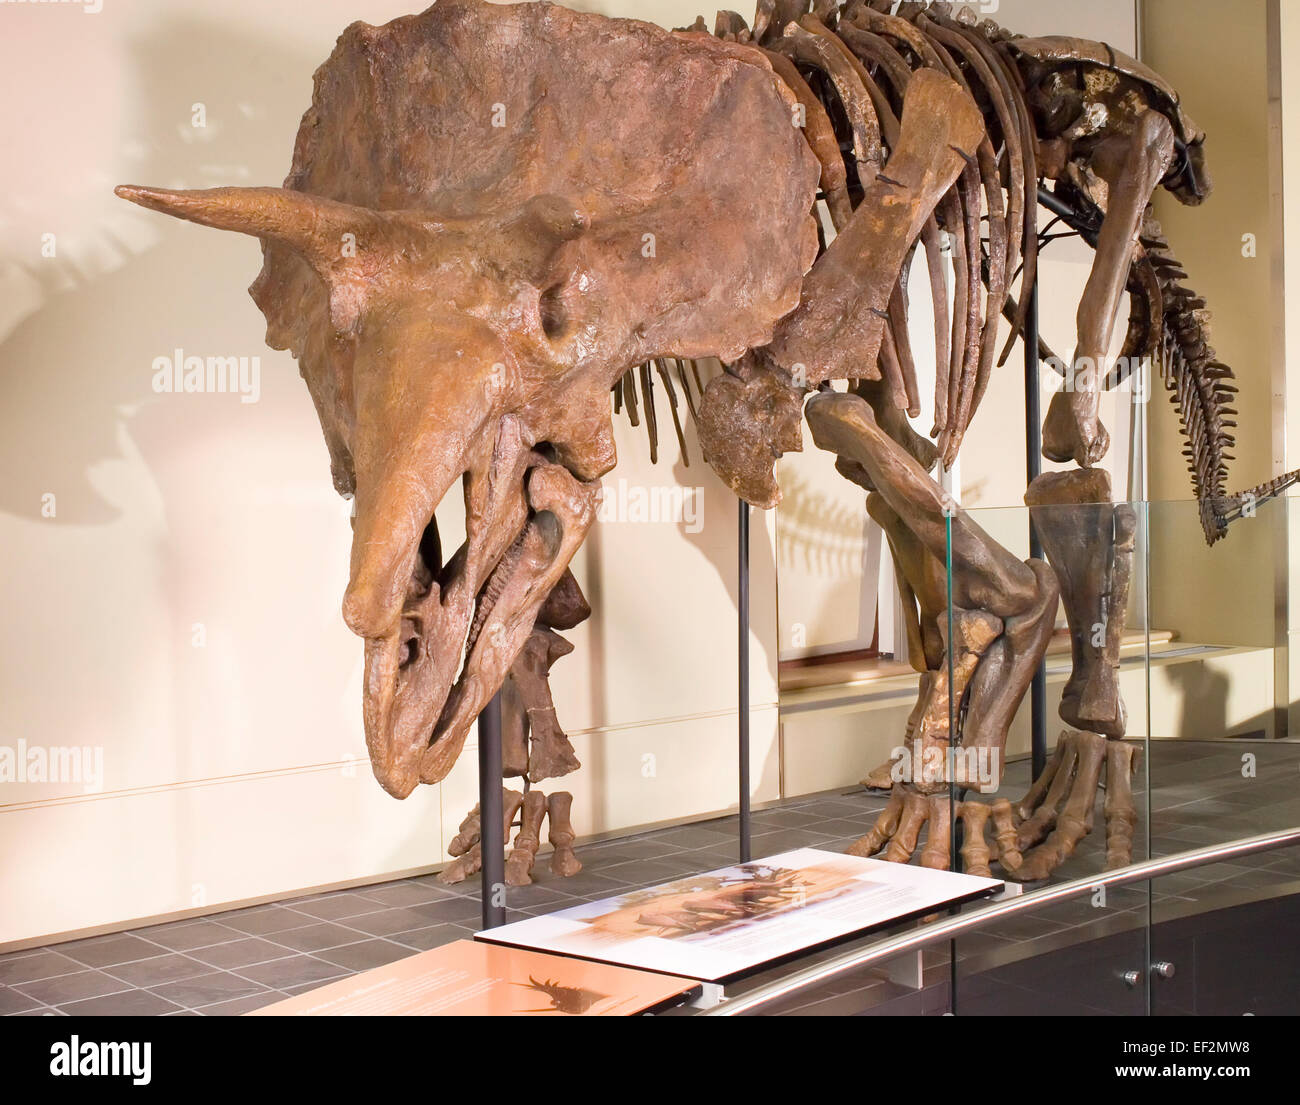 Triceratops dinosaur fossil in museum Stock Photo